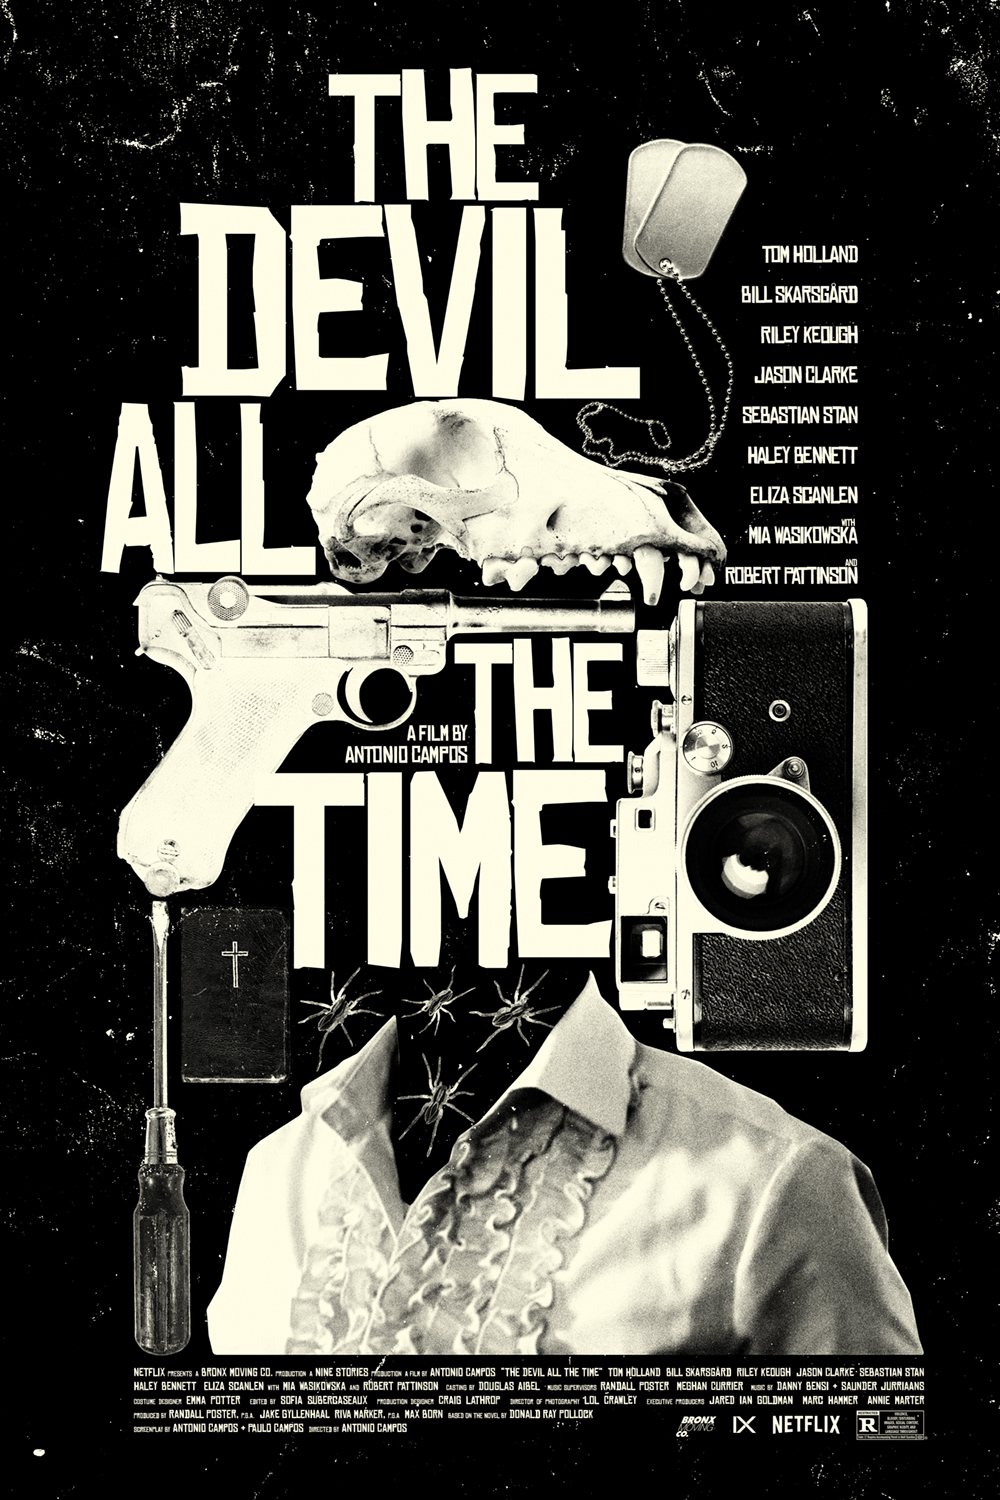 Movie poster for The Devil All the Time, collage of items